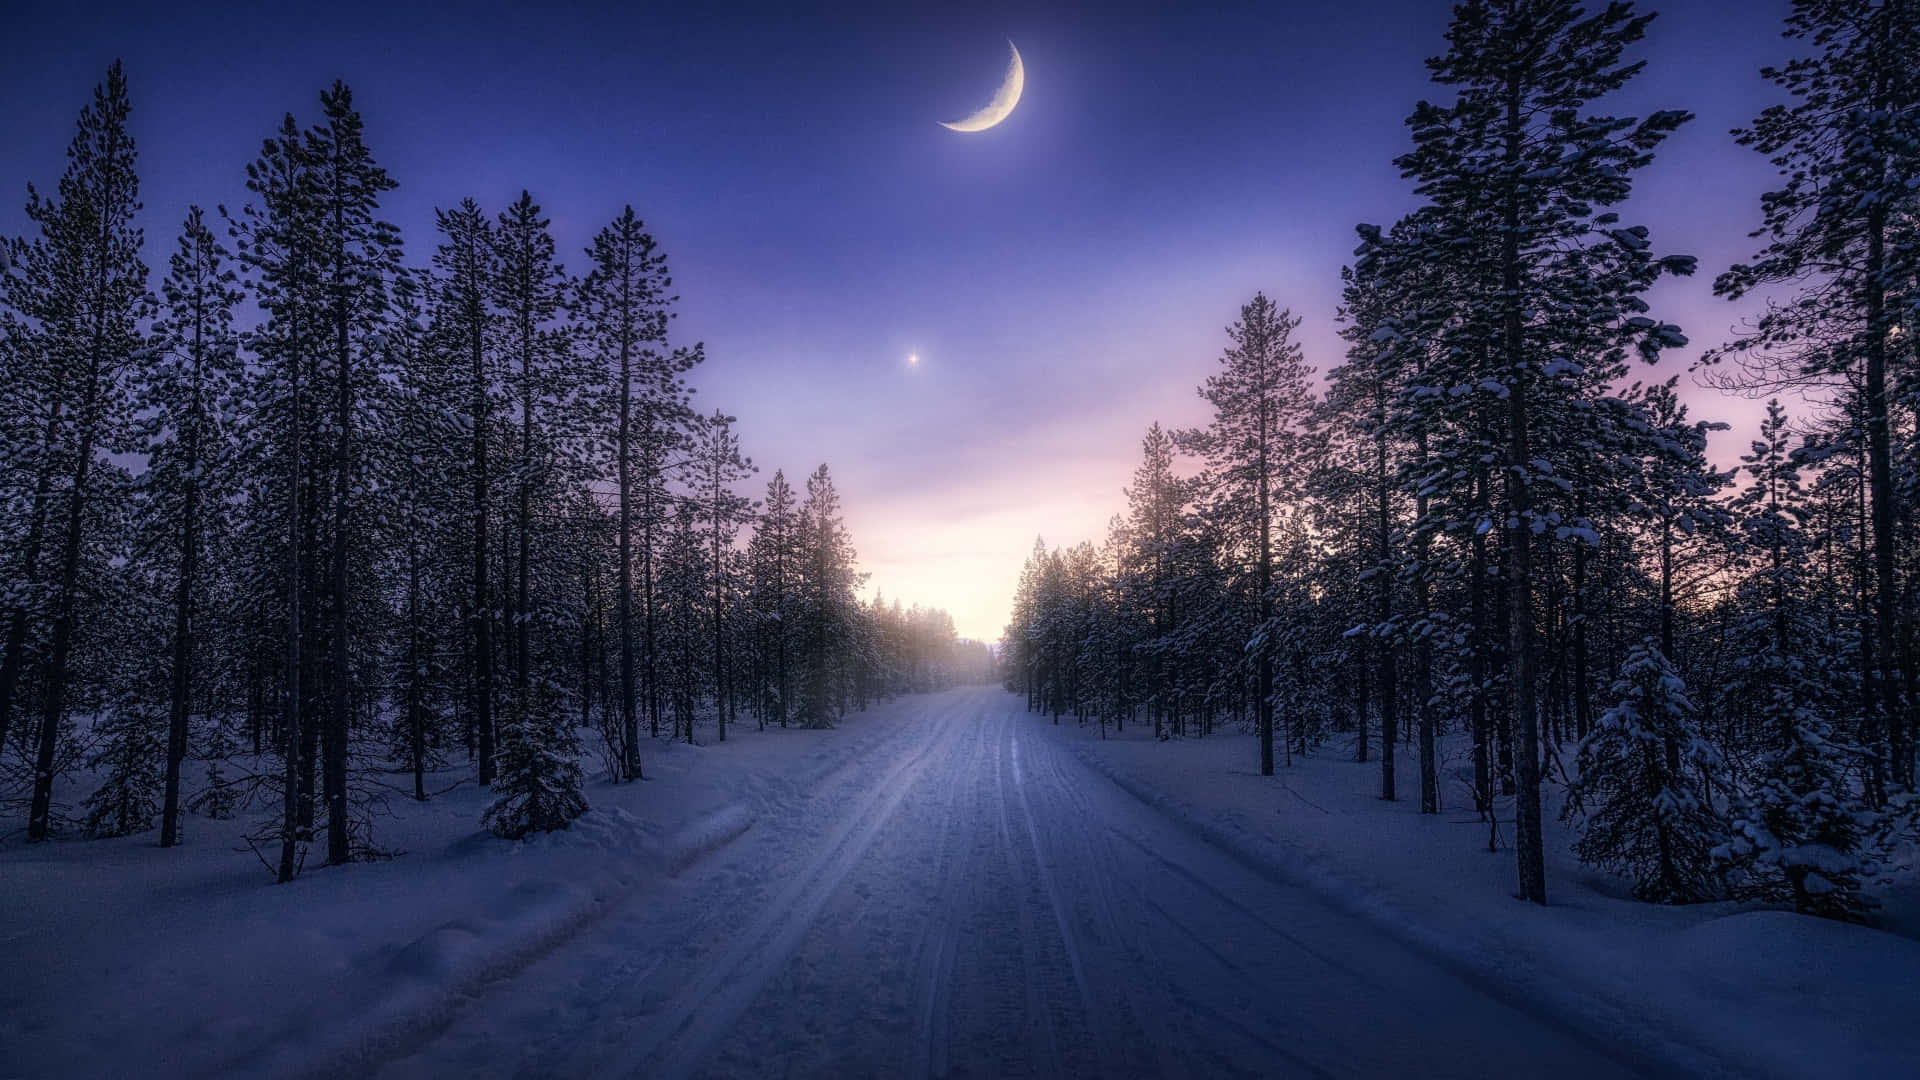 A Road With Trees And A Moon In The Sky Wallpaper